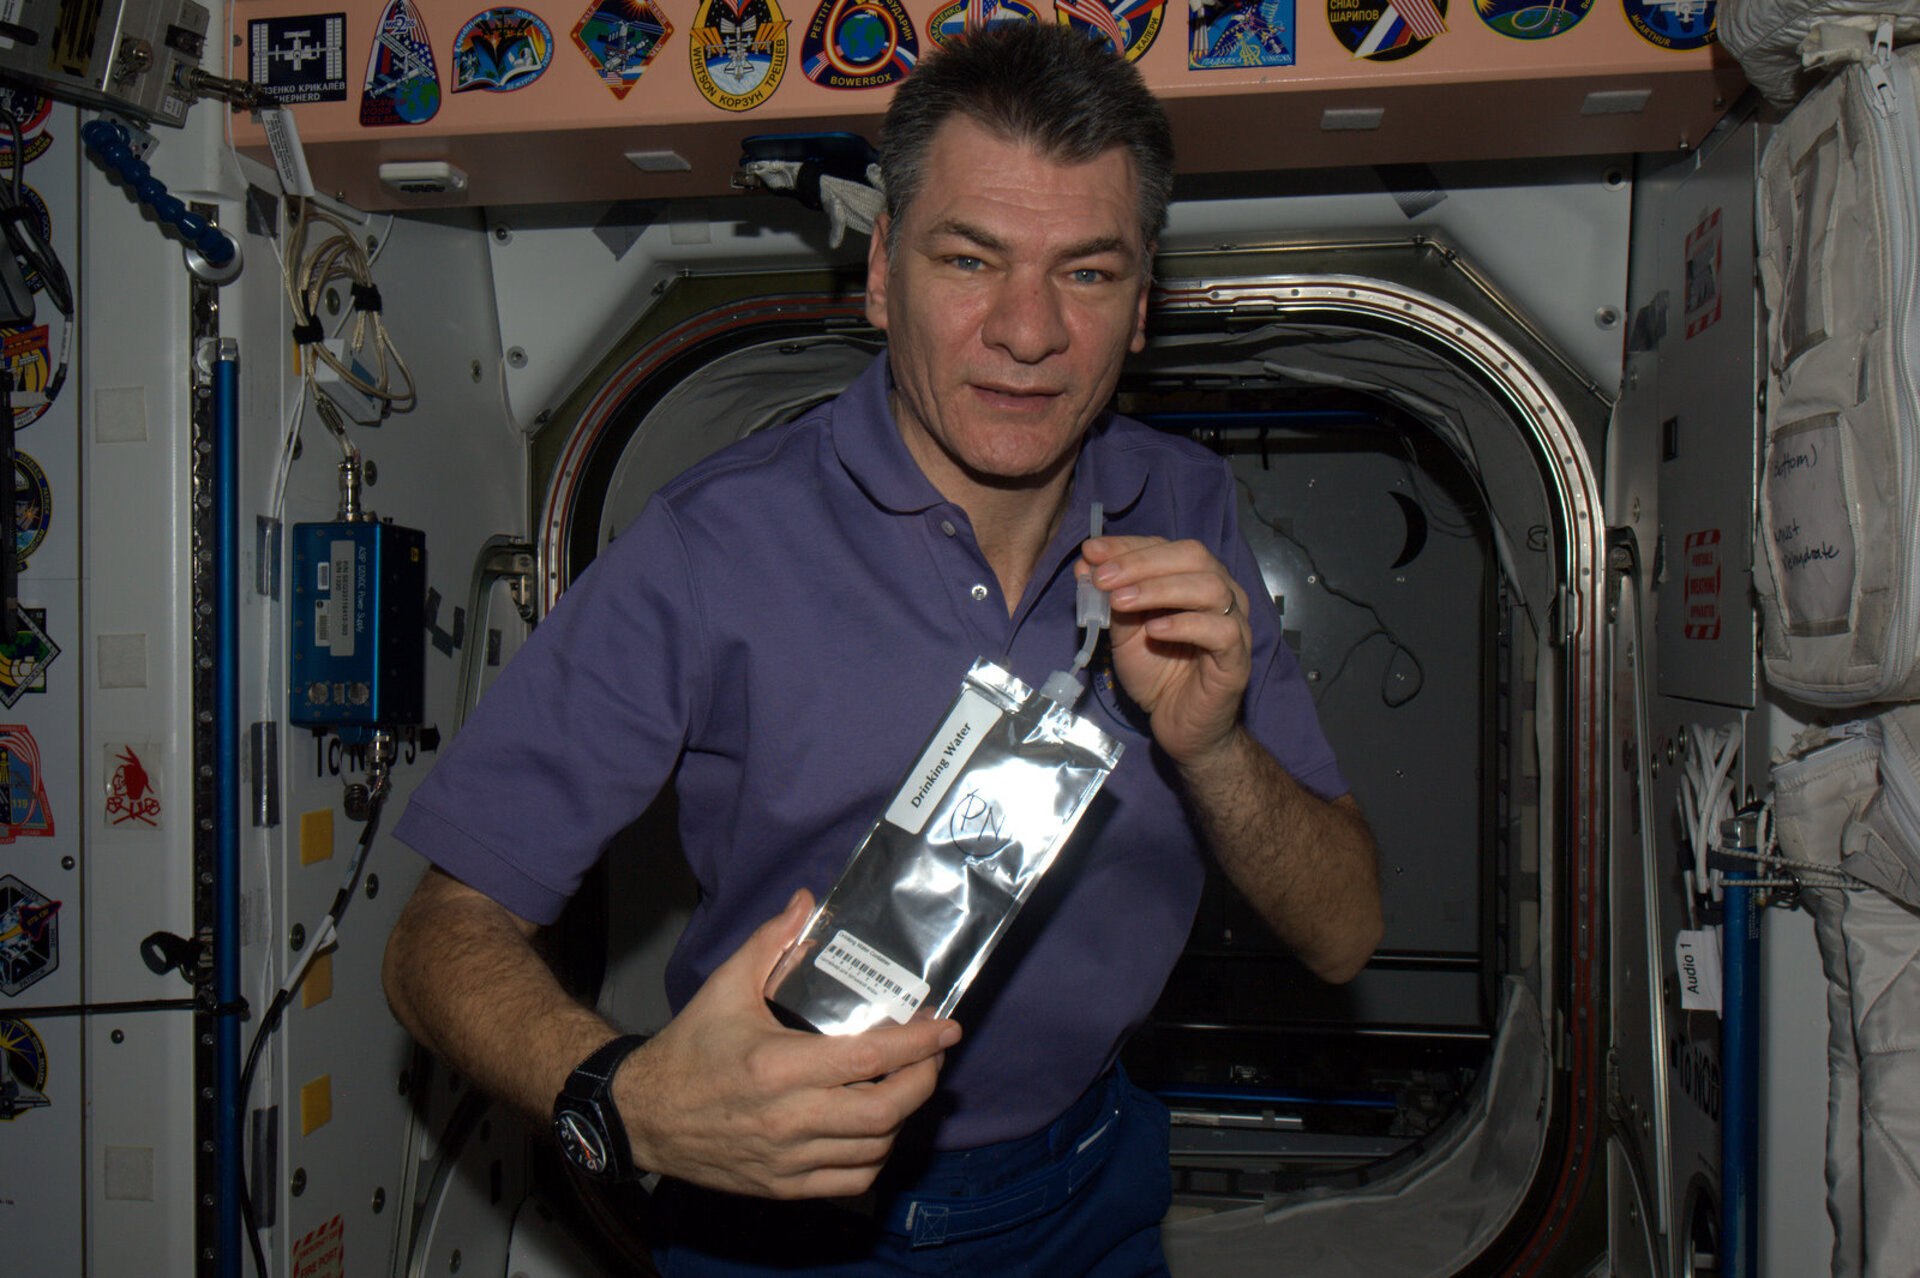 Paolo Nespoli shows his drinking straw on ISS